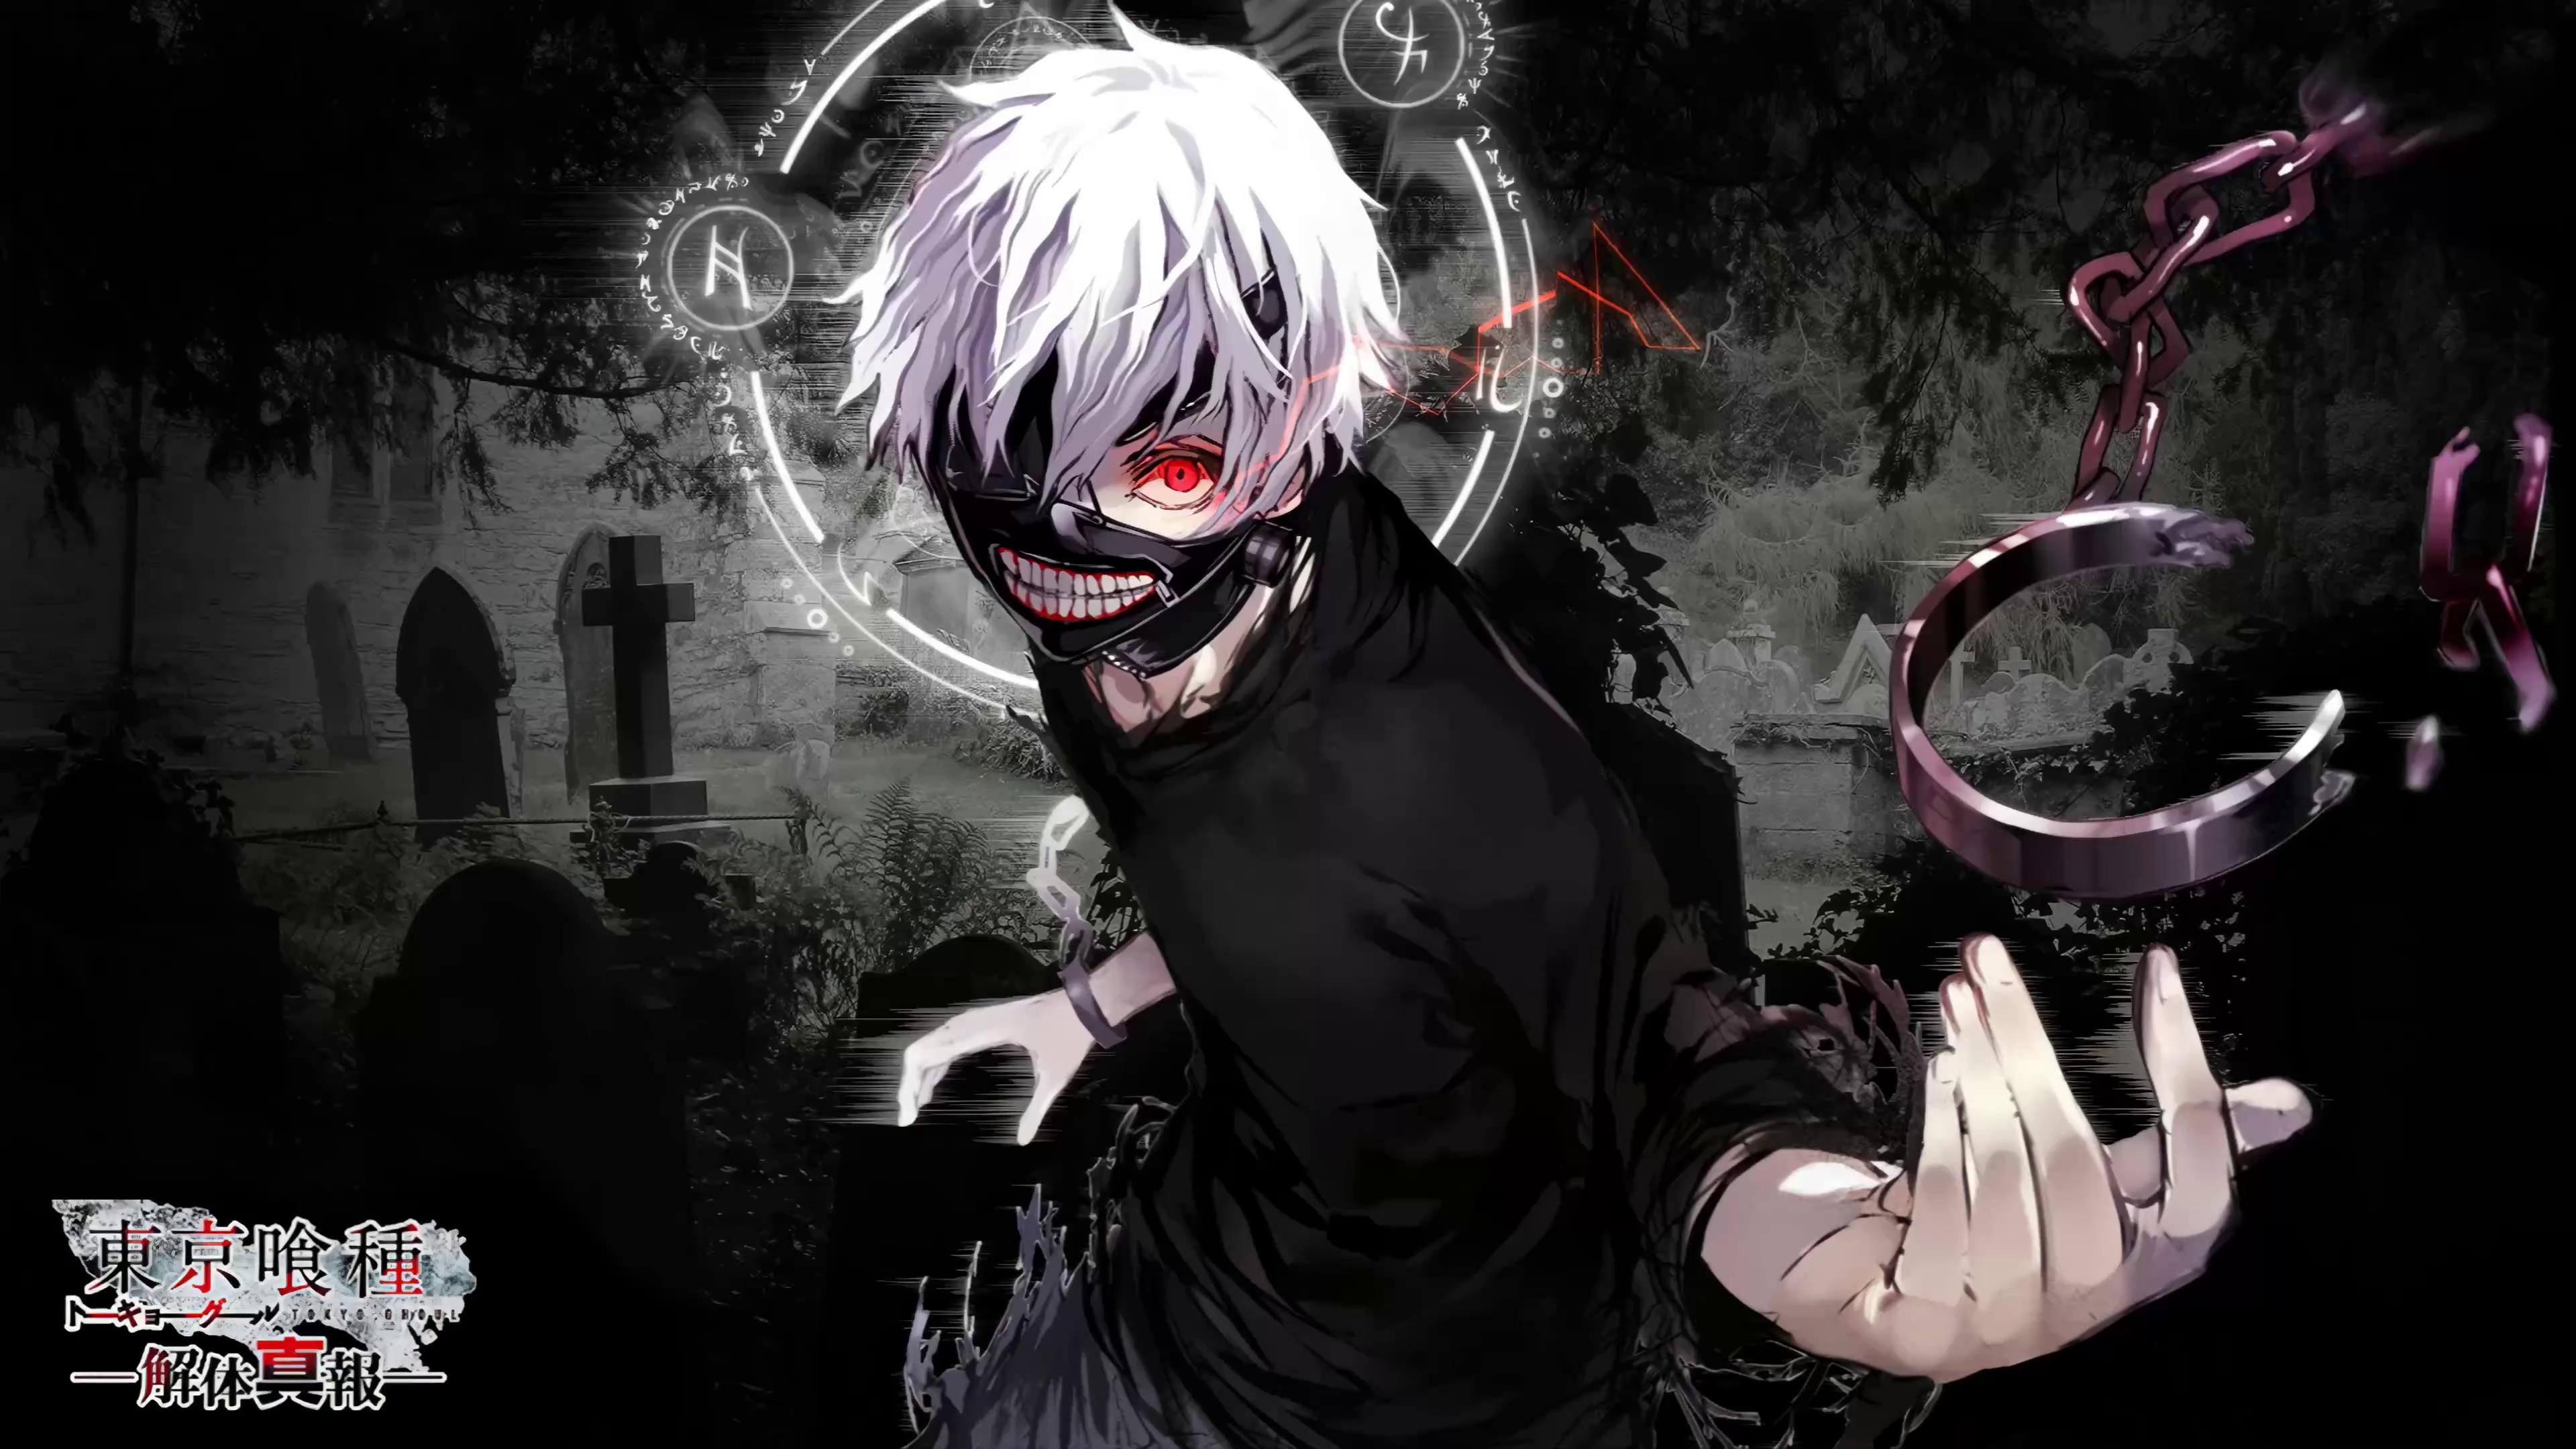 Kaneki 4K wallpapers for your desktop or mobile screen free and